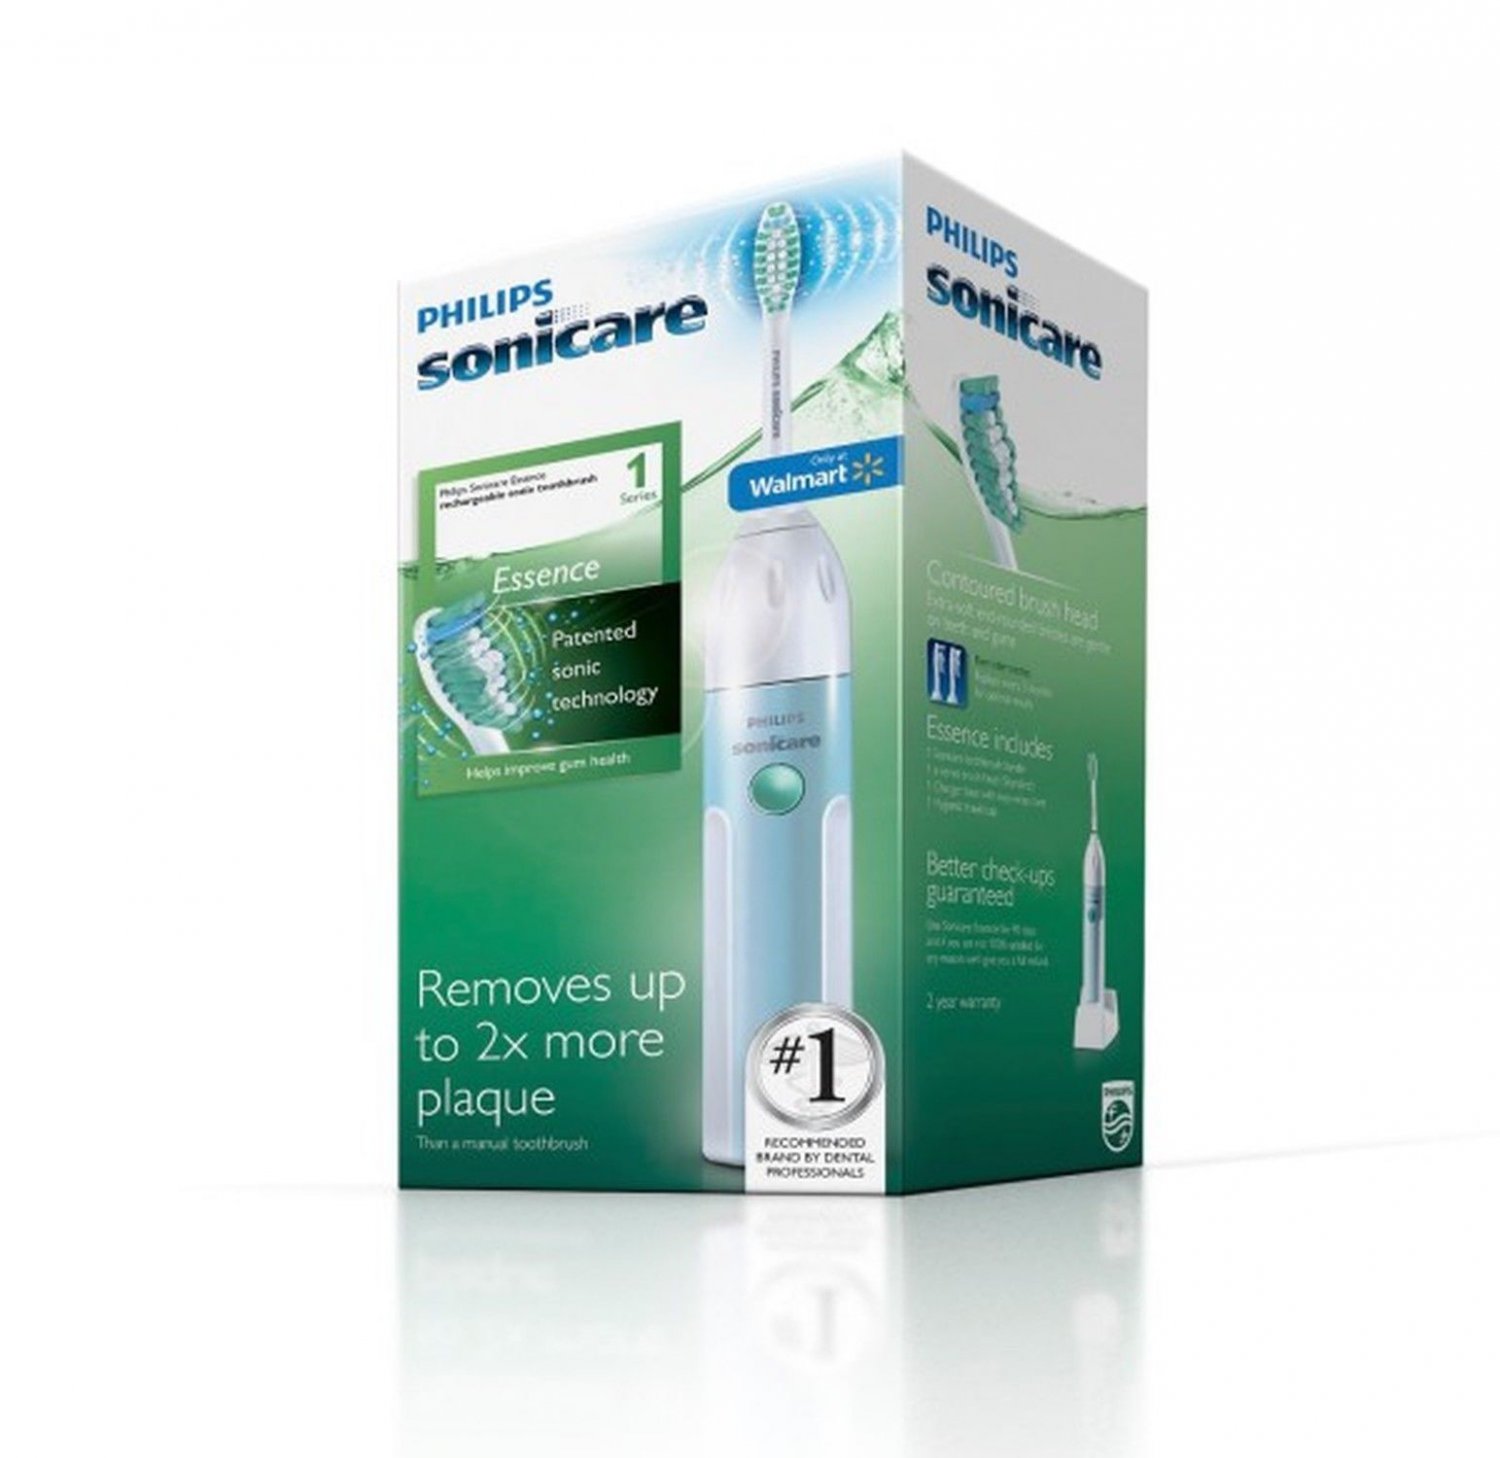 philips-sonicare-5-rebate-available-essence-1-series-rechargeable-sonic-to